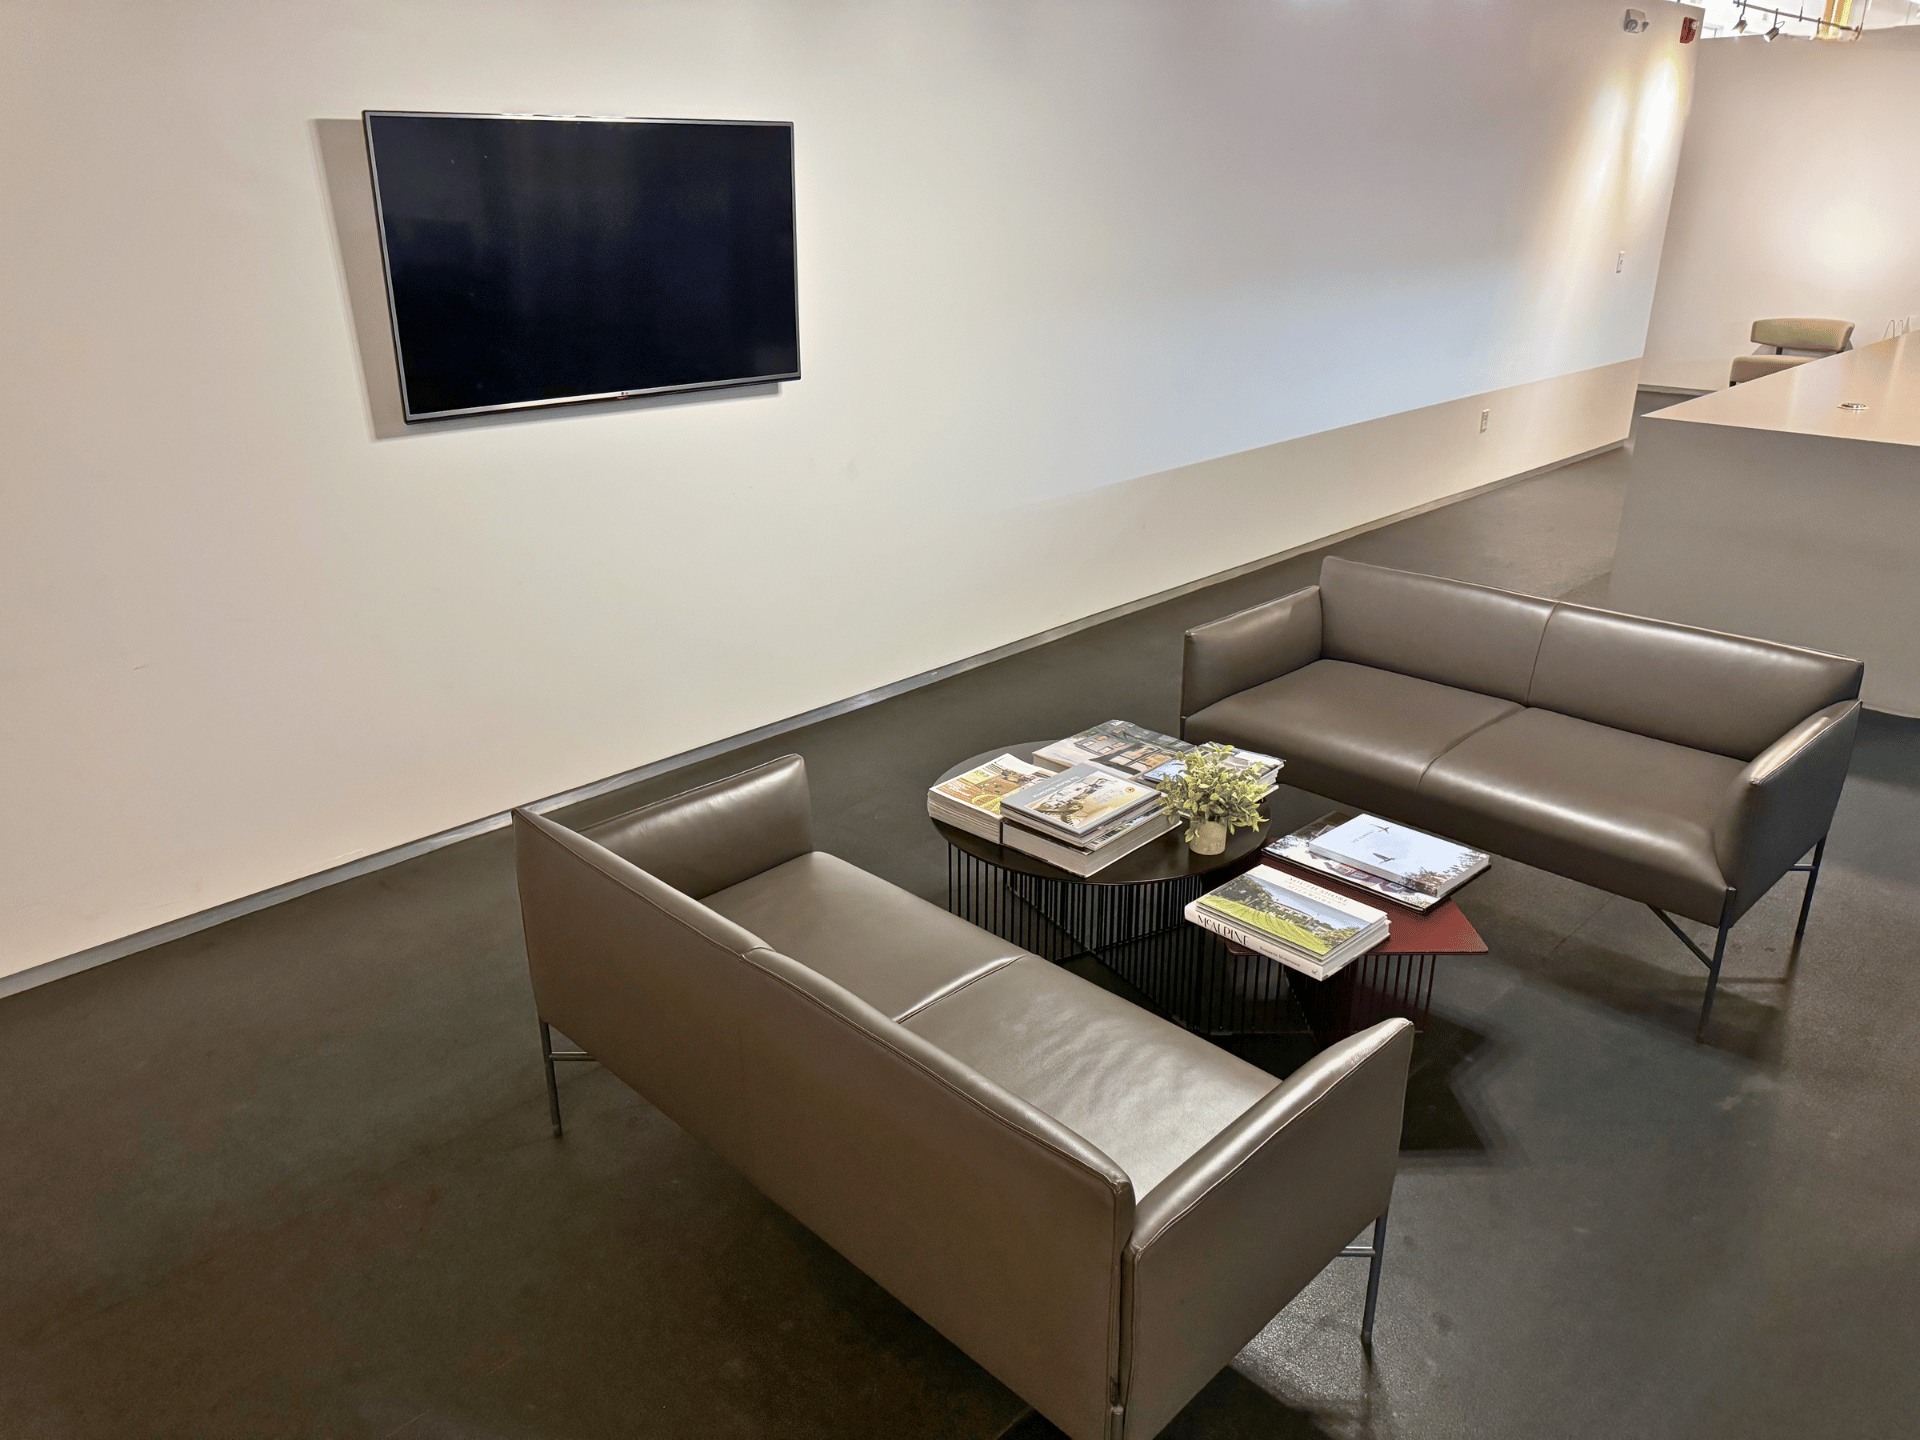 A living room with two couches and a television on the wall in a commercial office in Boston MA. This office reception is cleaned by ThinkFast Cleaning Services.